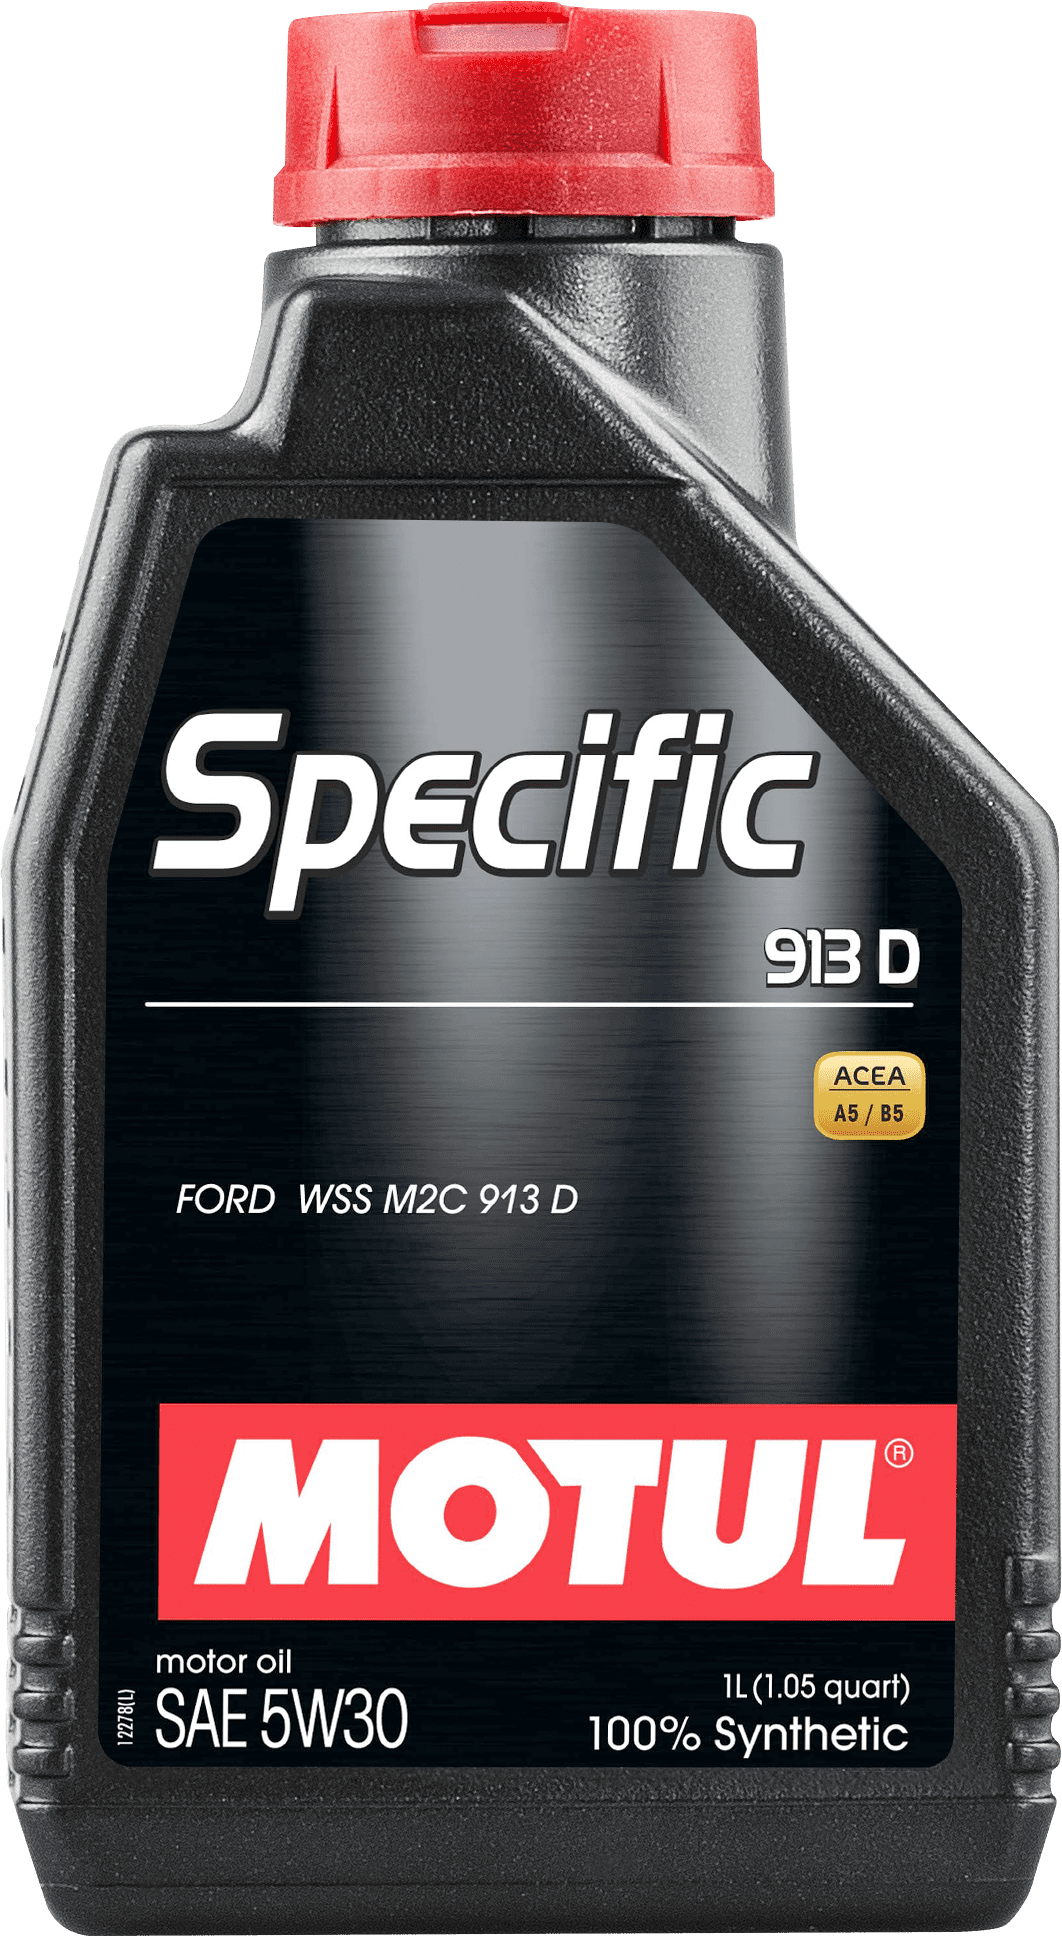 104559-1 100% Synthetic lubricant specially designed for FORD gasoline and diesel engine requiring an approved FORD WSS M2C 913D engine oil.